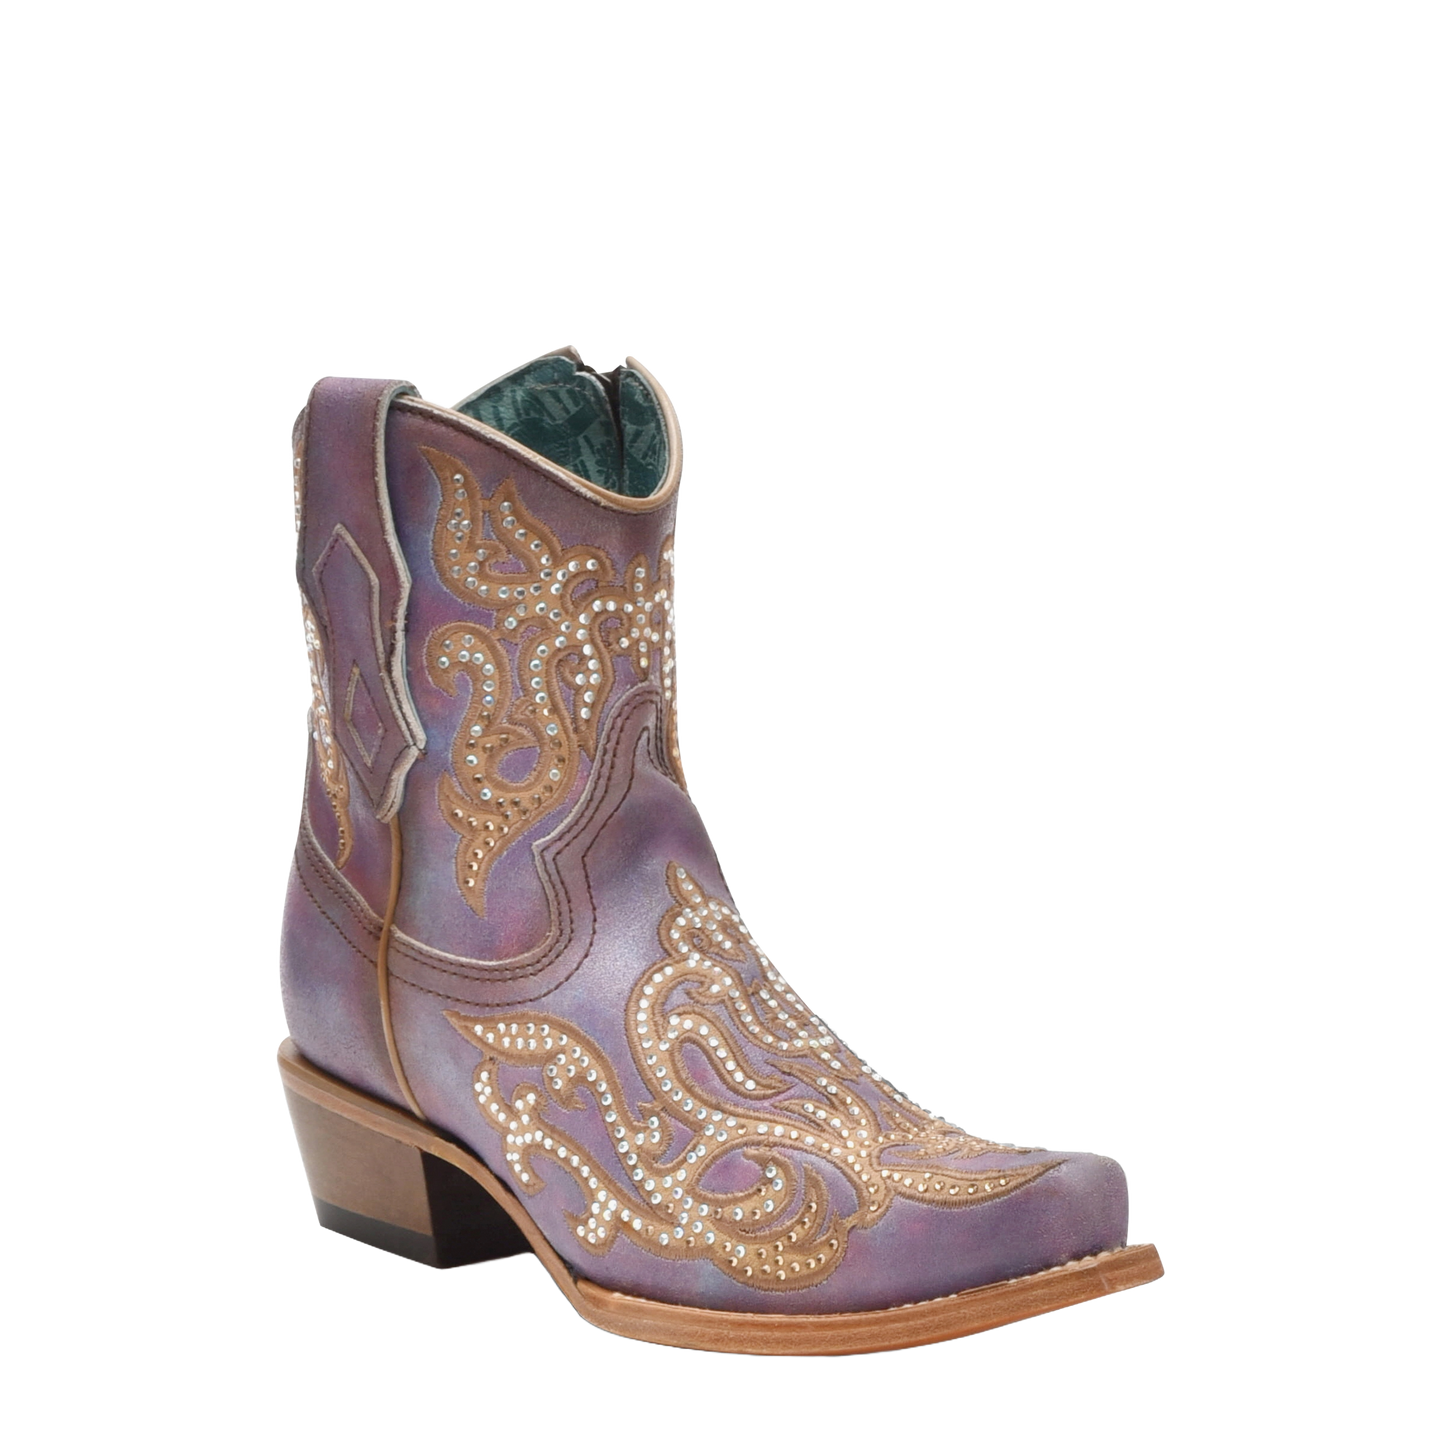 Corral Ladies Distressed Embroidery Violet-Honey Zipper Ankle Boots C4107